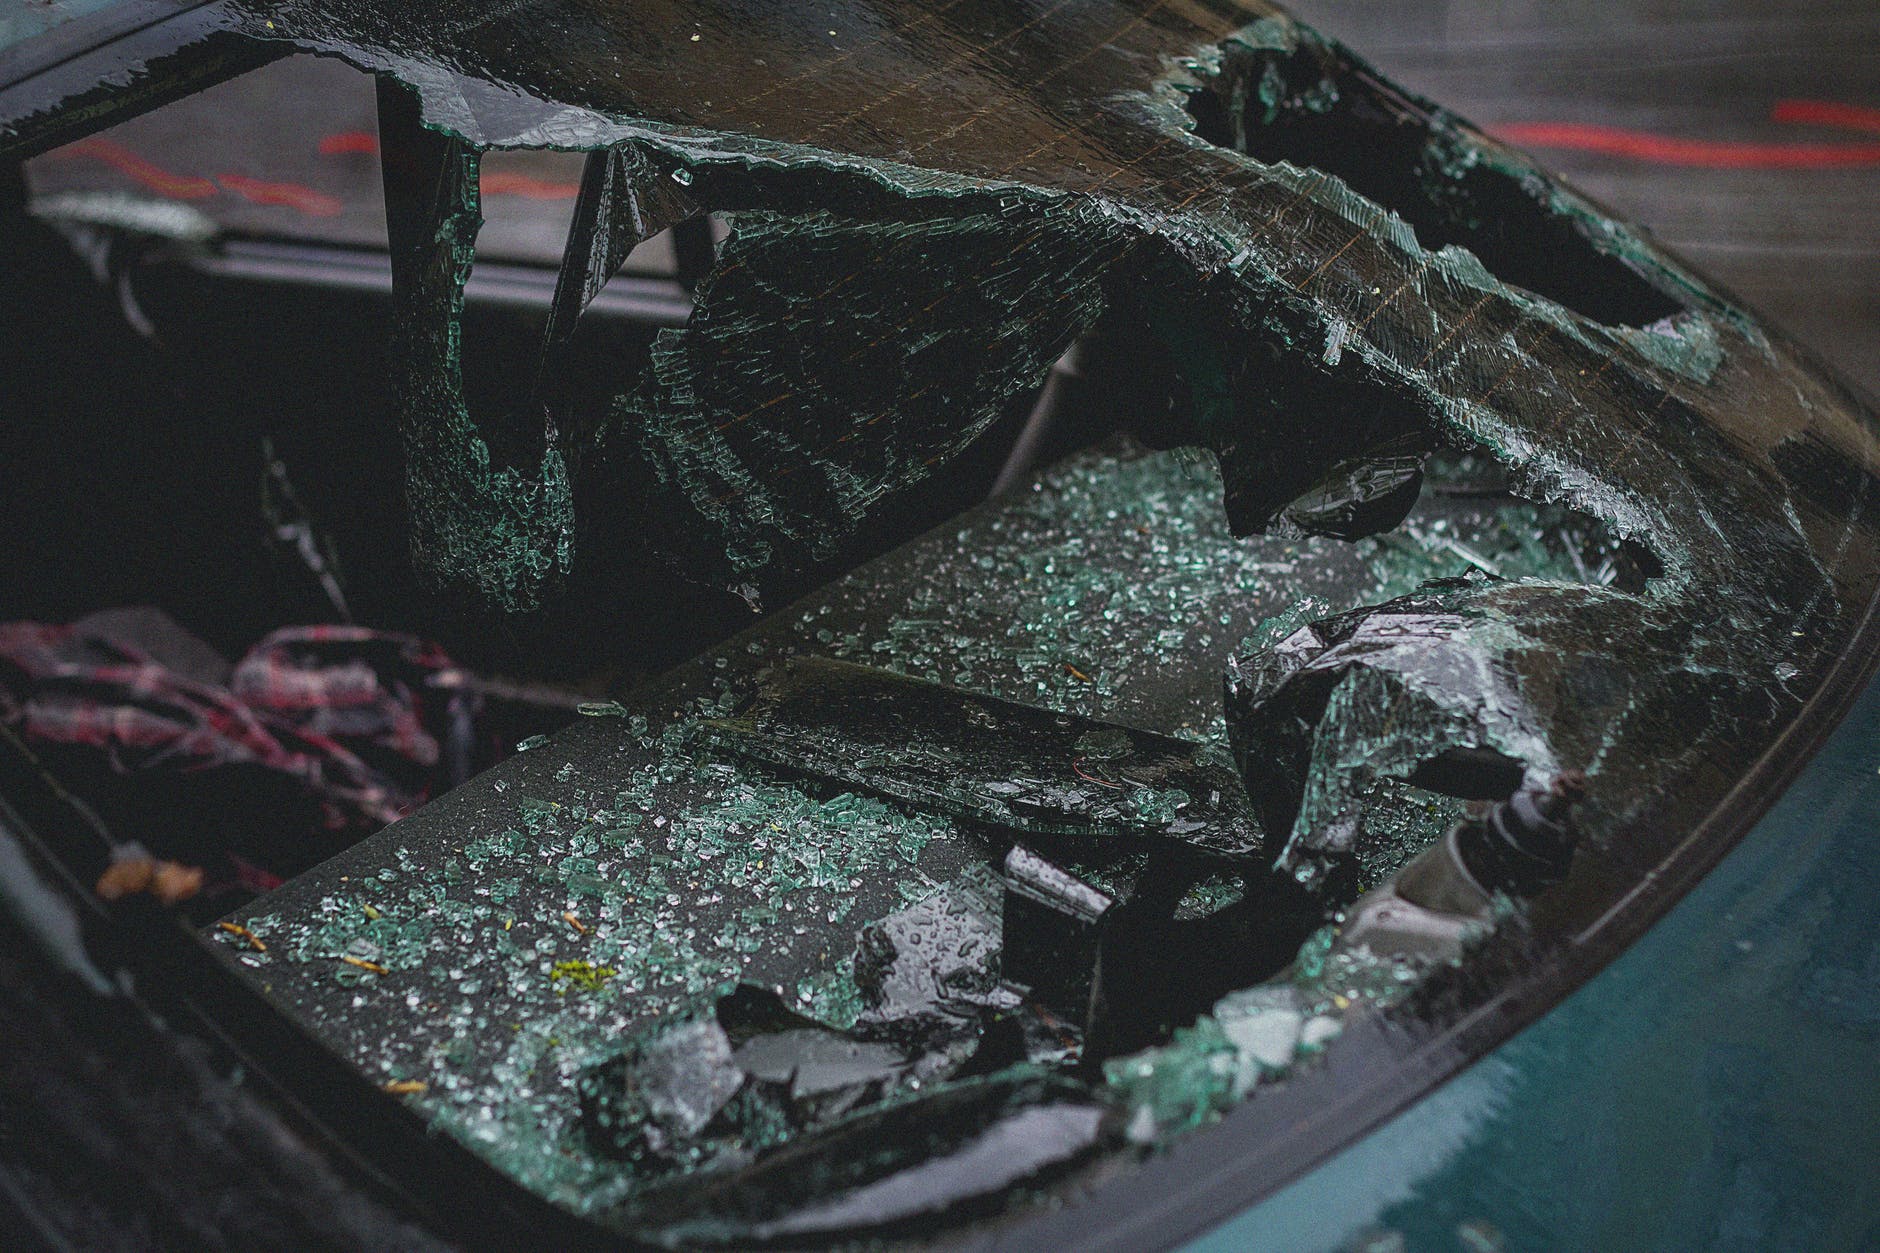 Valerie was thrown off the car during the crash. | Source: Pexels